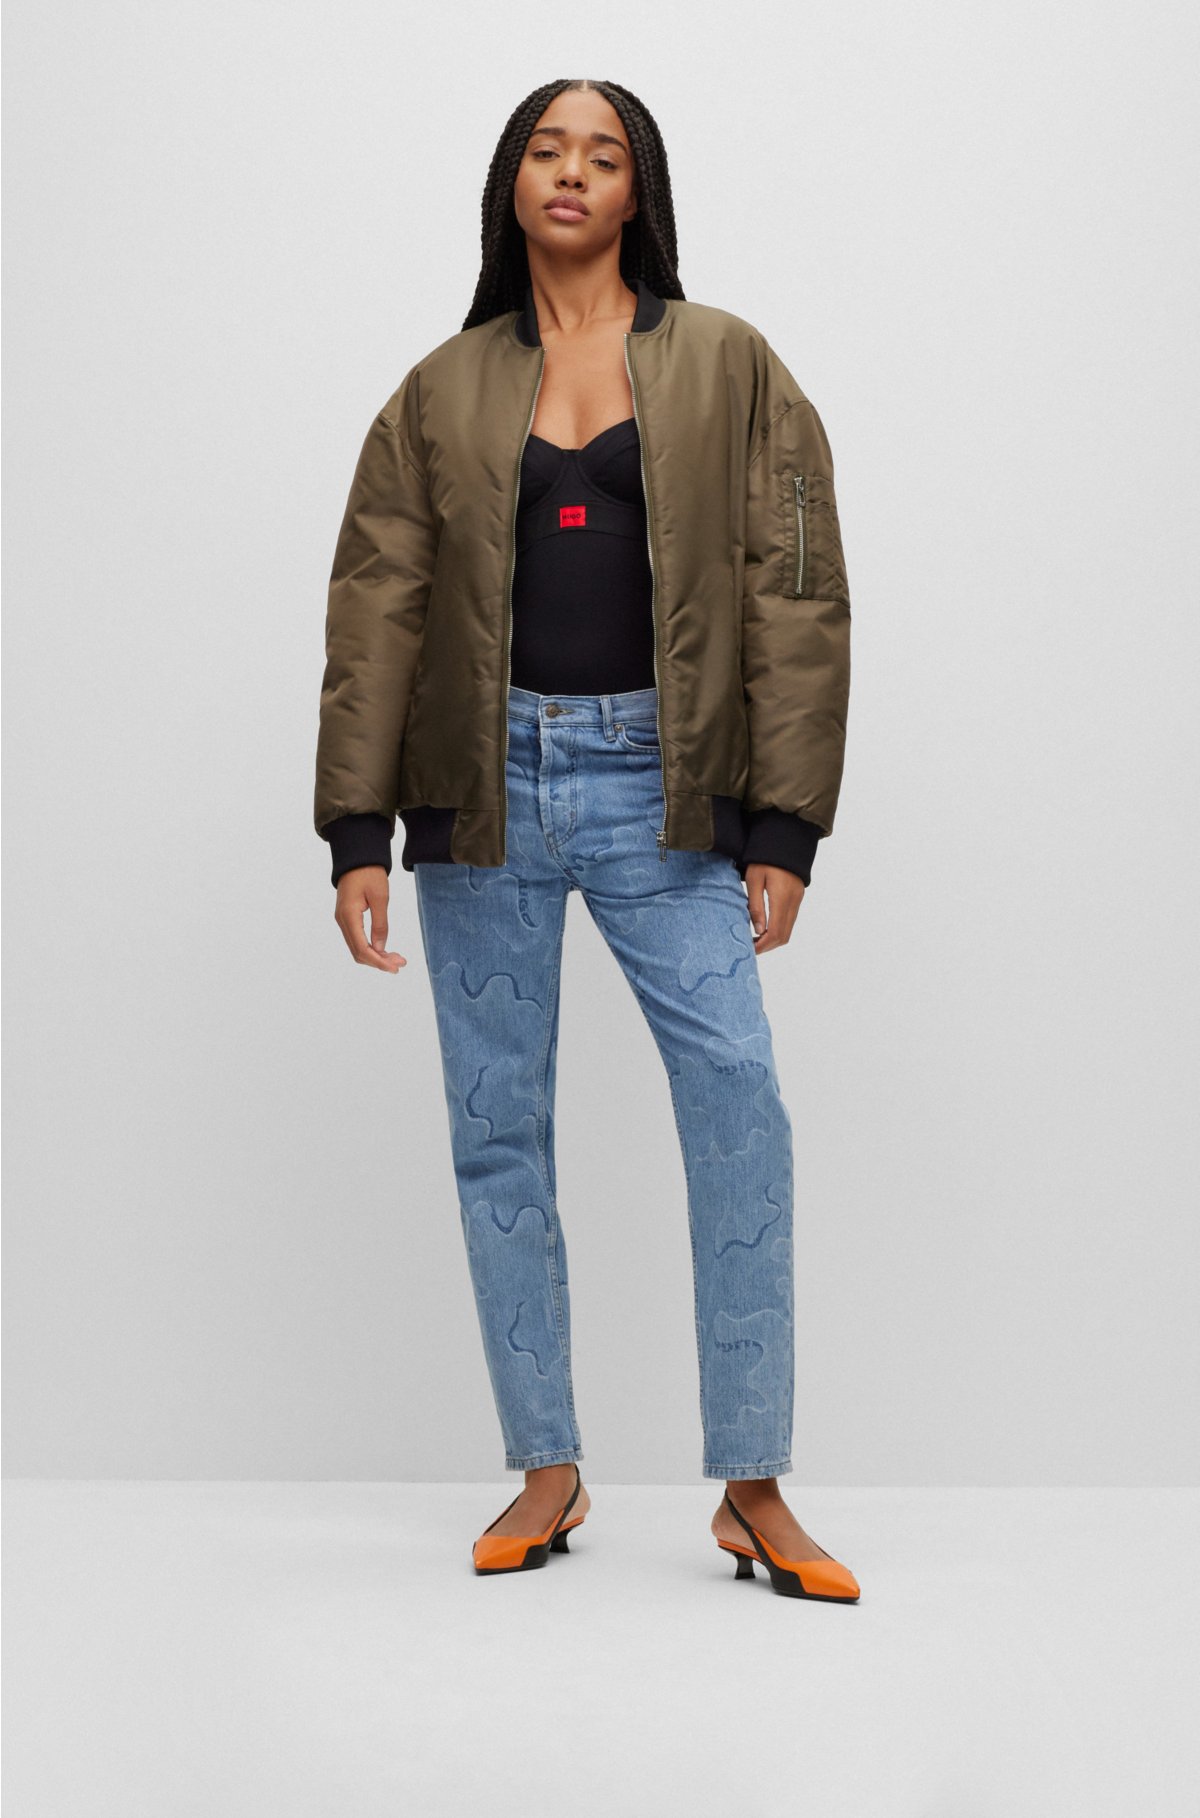 Women's Oversized Bomber Jacket: How to Style this Essential Piece - Posh  in Progress